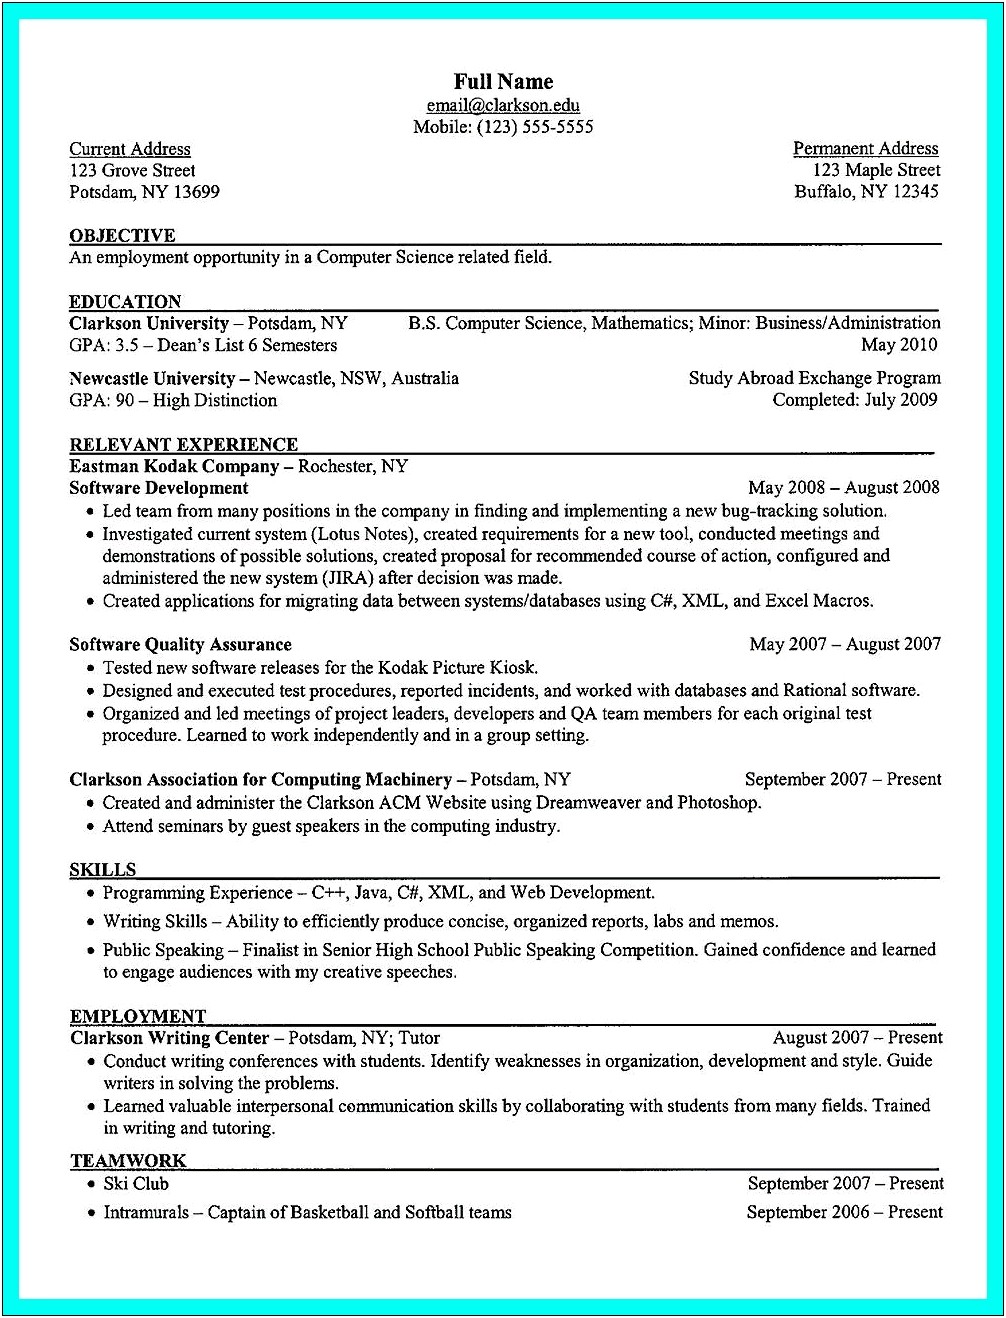 Computer Engineering Student Resume No Experience